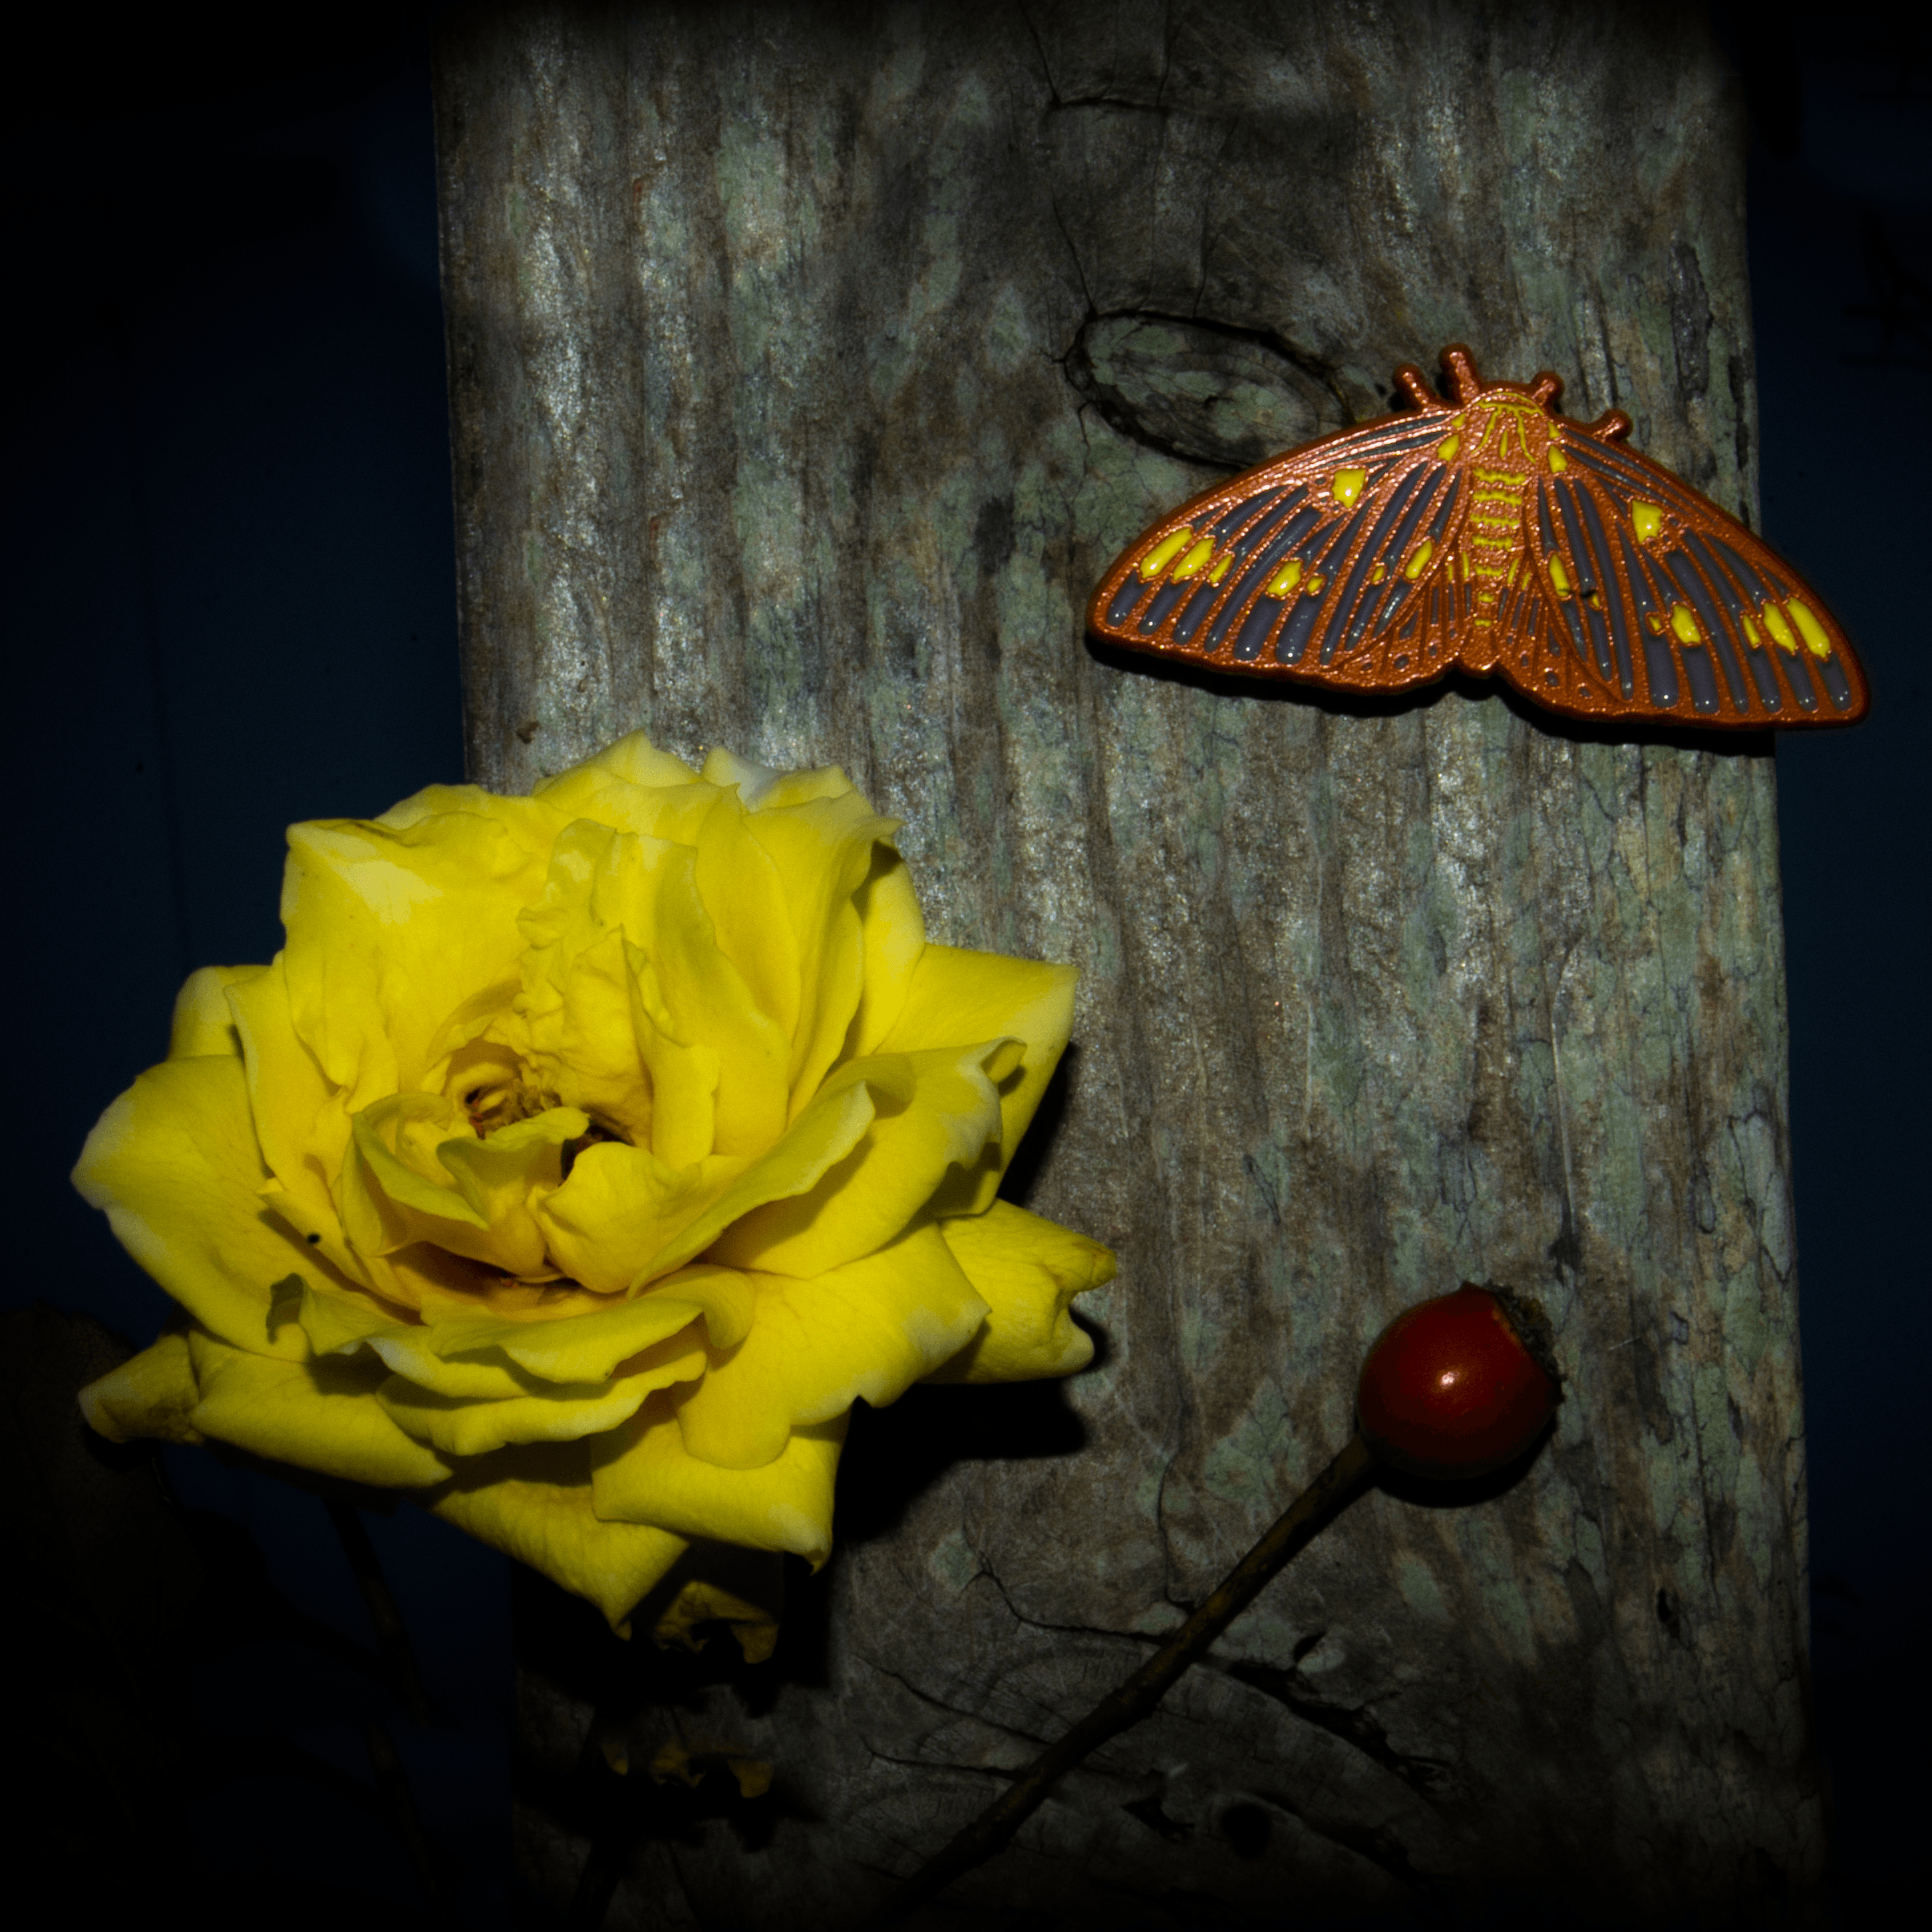 A brightly colored orange, yellow, and grey Citheronia Regalis (Regal moth, Royal Walnut Moth) arranged with a yellow rose and rosehip on a weathered piece of wood.